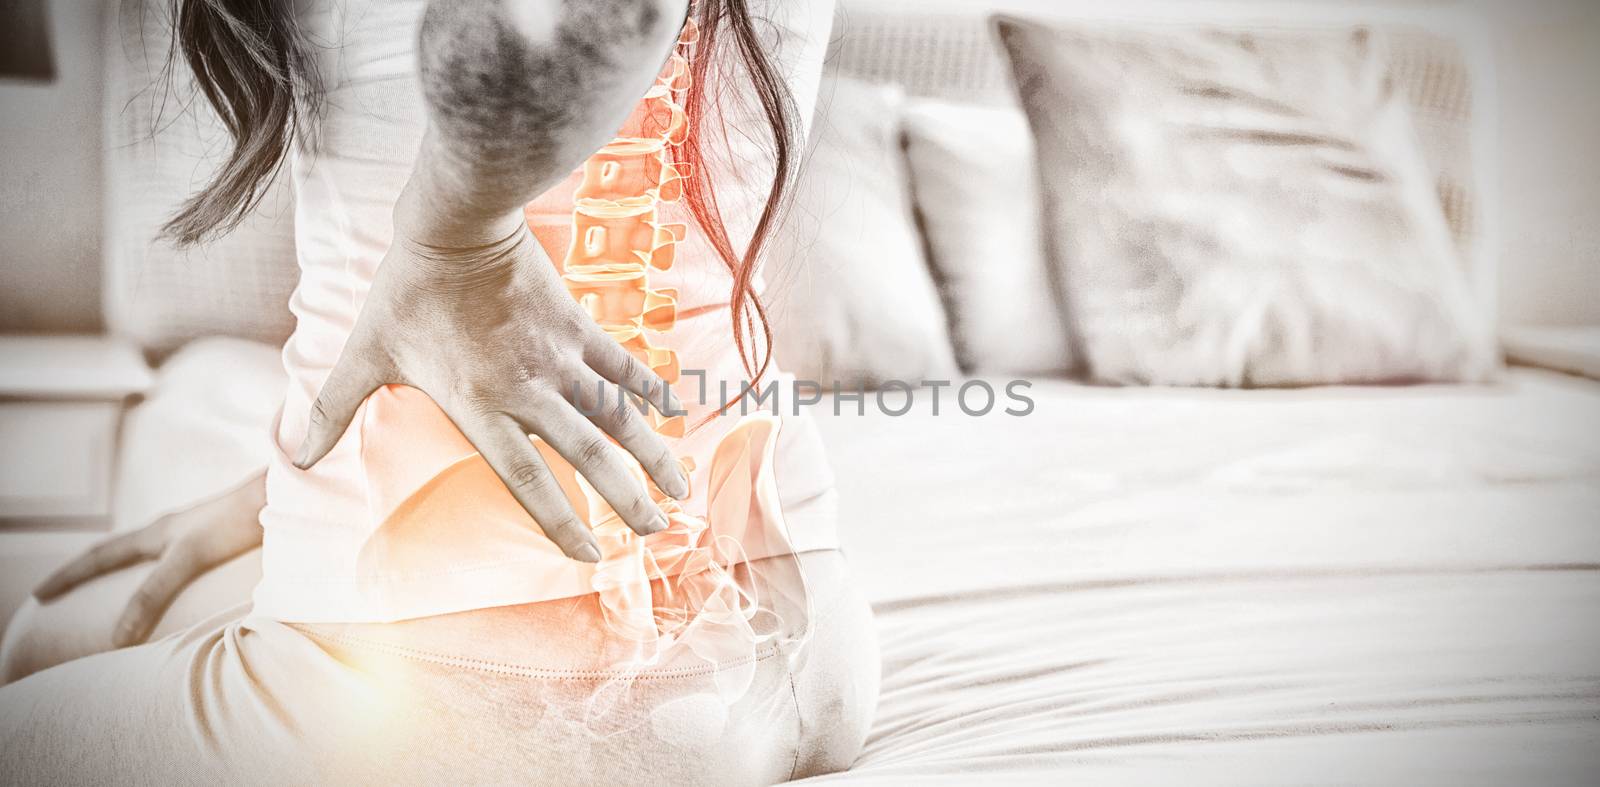 Digital composite of highlighted spine of woman with back pain at home